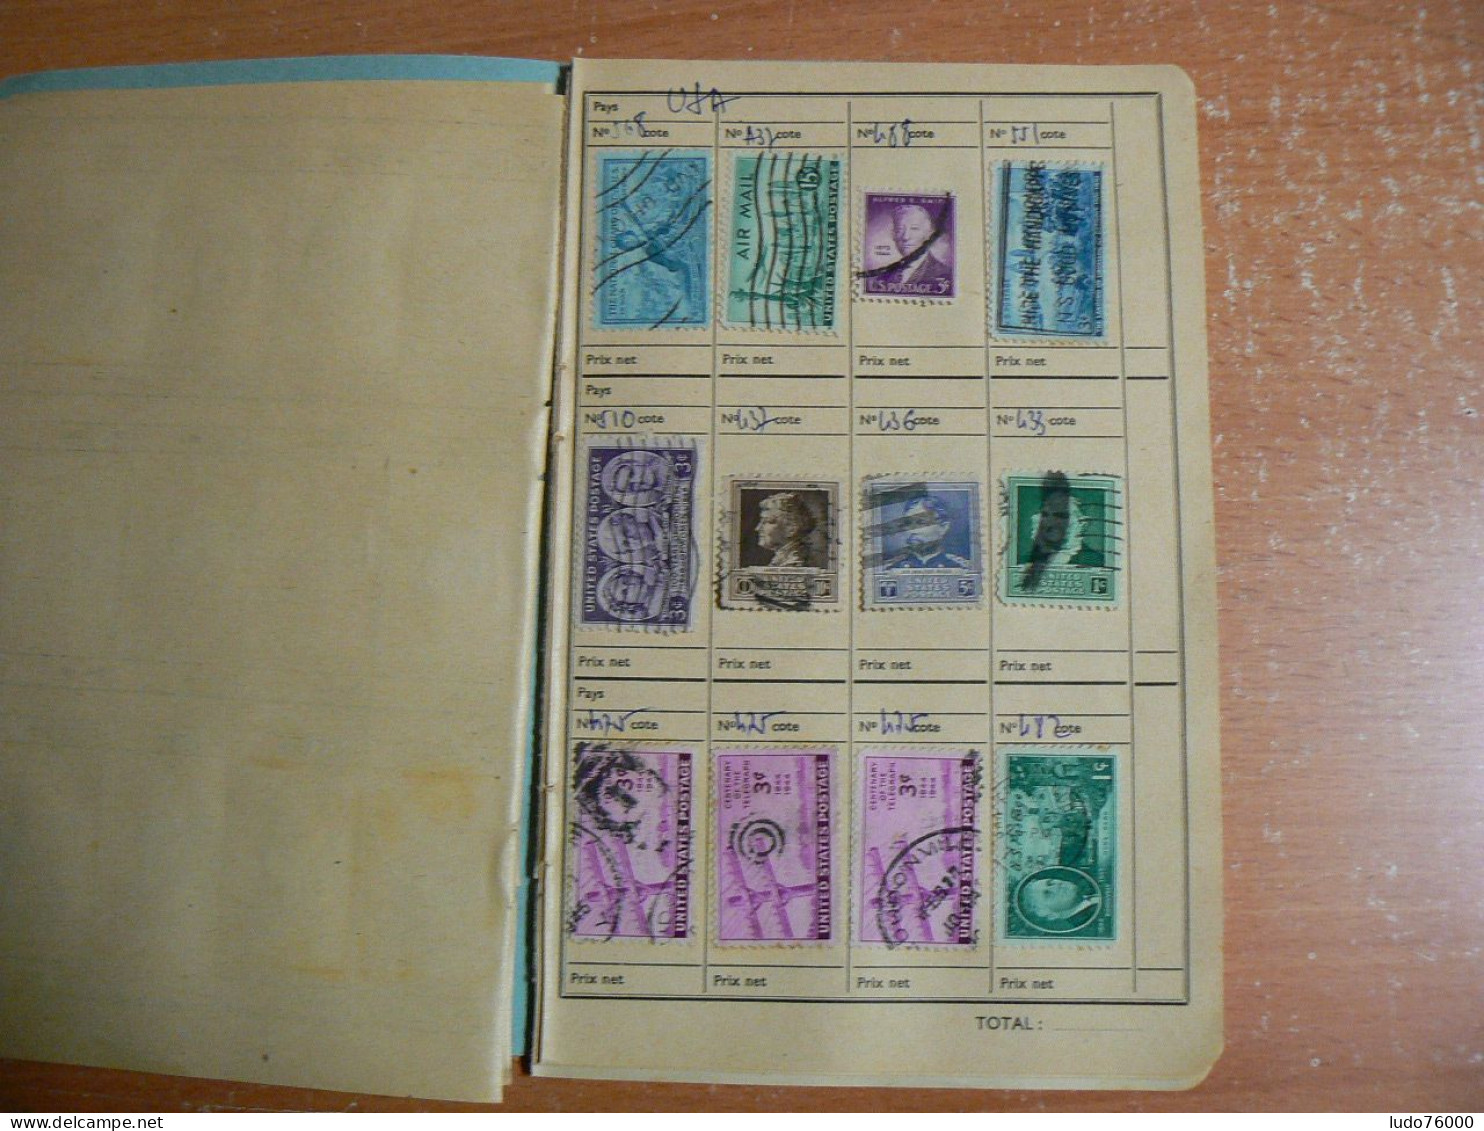 D 787 / VRAC USA / 8 PAGES / 03 - Lots & Kiloware (mixtures) - Max. 999 Stamps